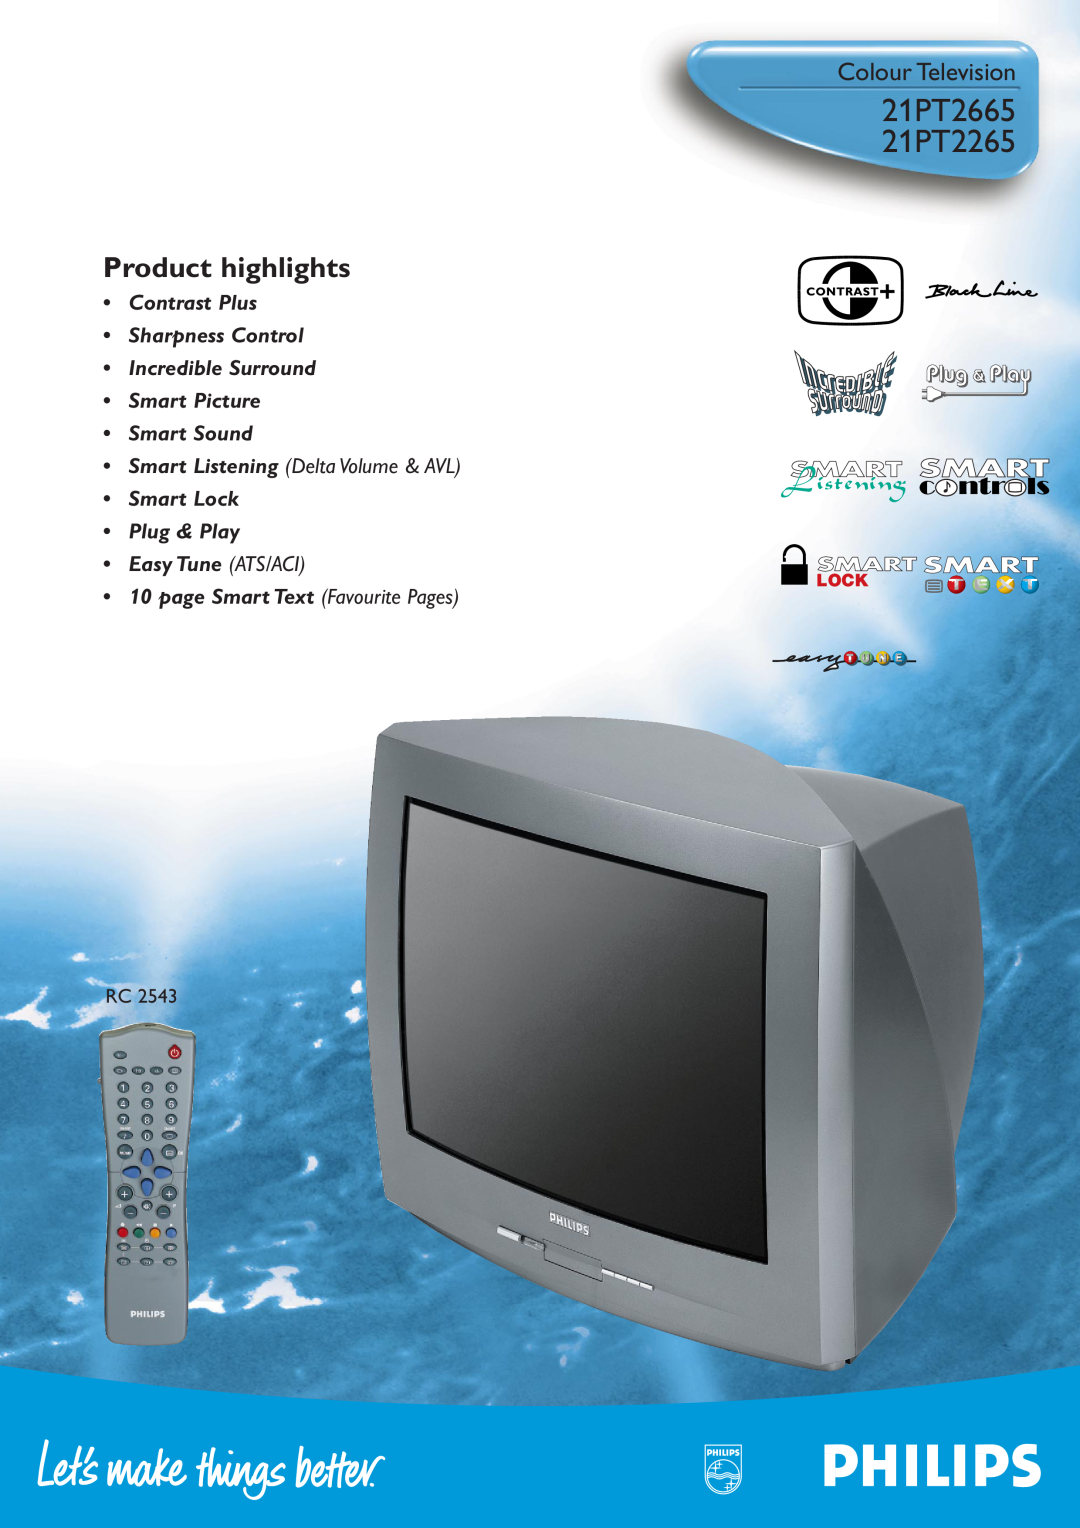 Philips manual 21PT2665 21PT2265, Colour Television, Product highlights, Smart Sound, page Smart Text Favourite Pages 